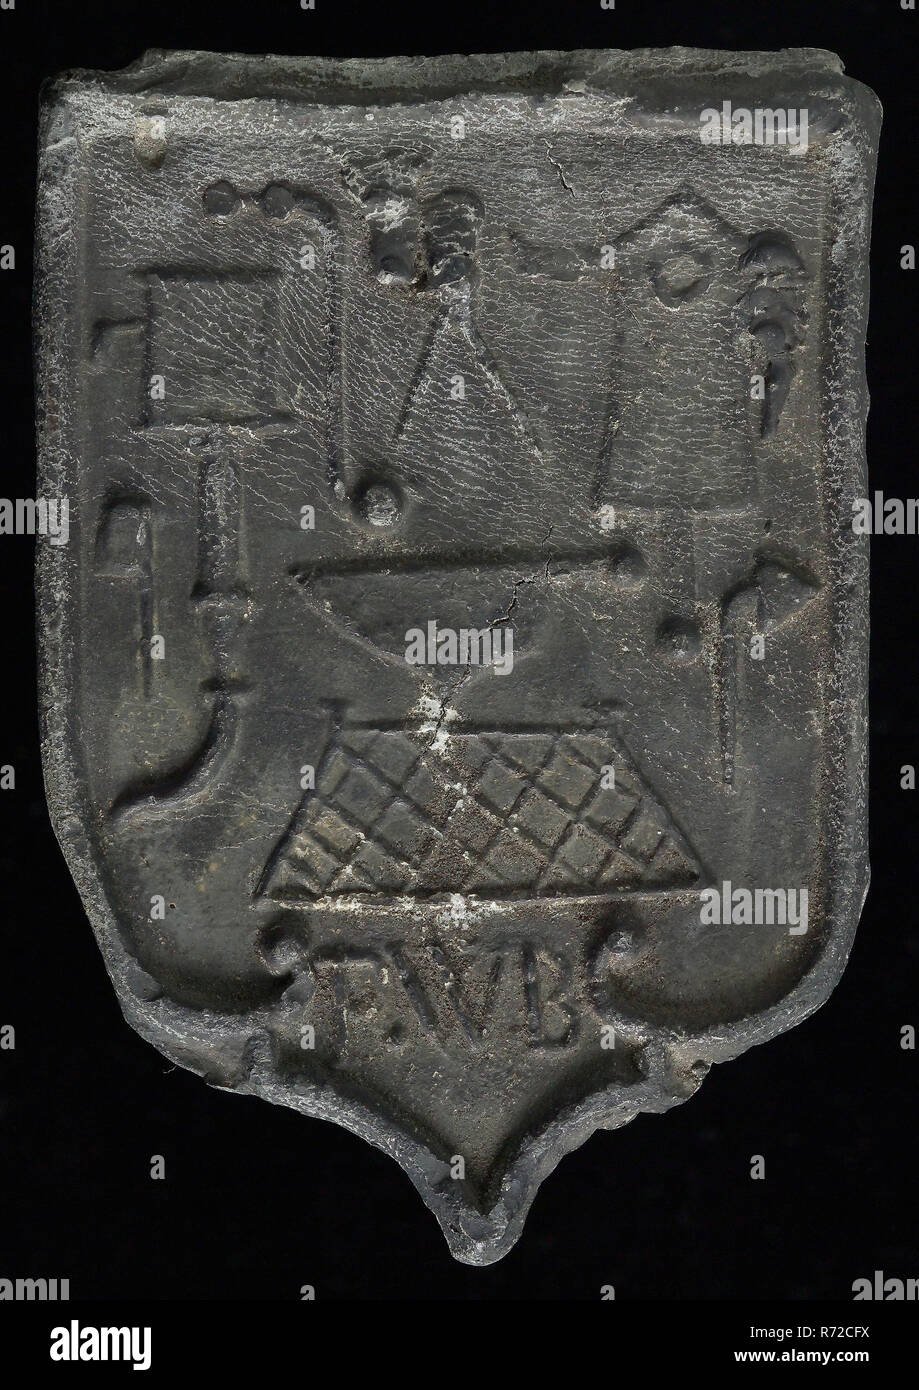 FWB, Roof lead, shield-shaped cover plate with initials FWB and various guide tools, bracing lead quality mark metal lead, Roof bonnet shield shaped cover of the nails with the initials of the plumber F.W.. and above various guide tools, F.W.. slate From the roof of the Courthouse on the Kloosterlaan in Breda. Stock Photo